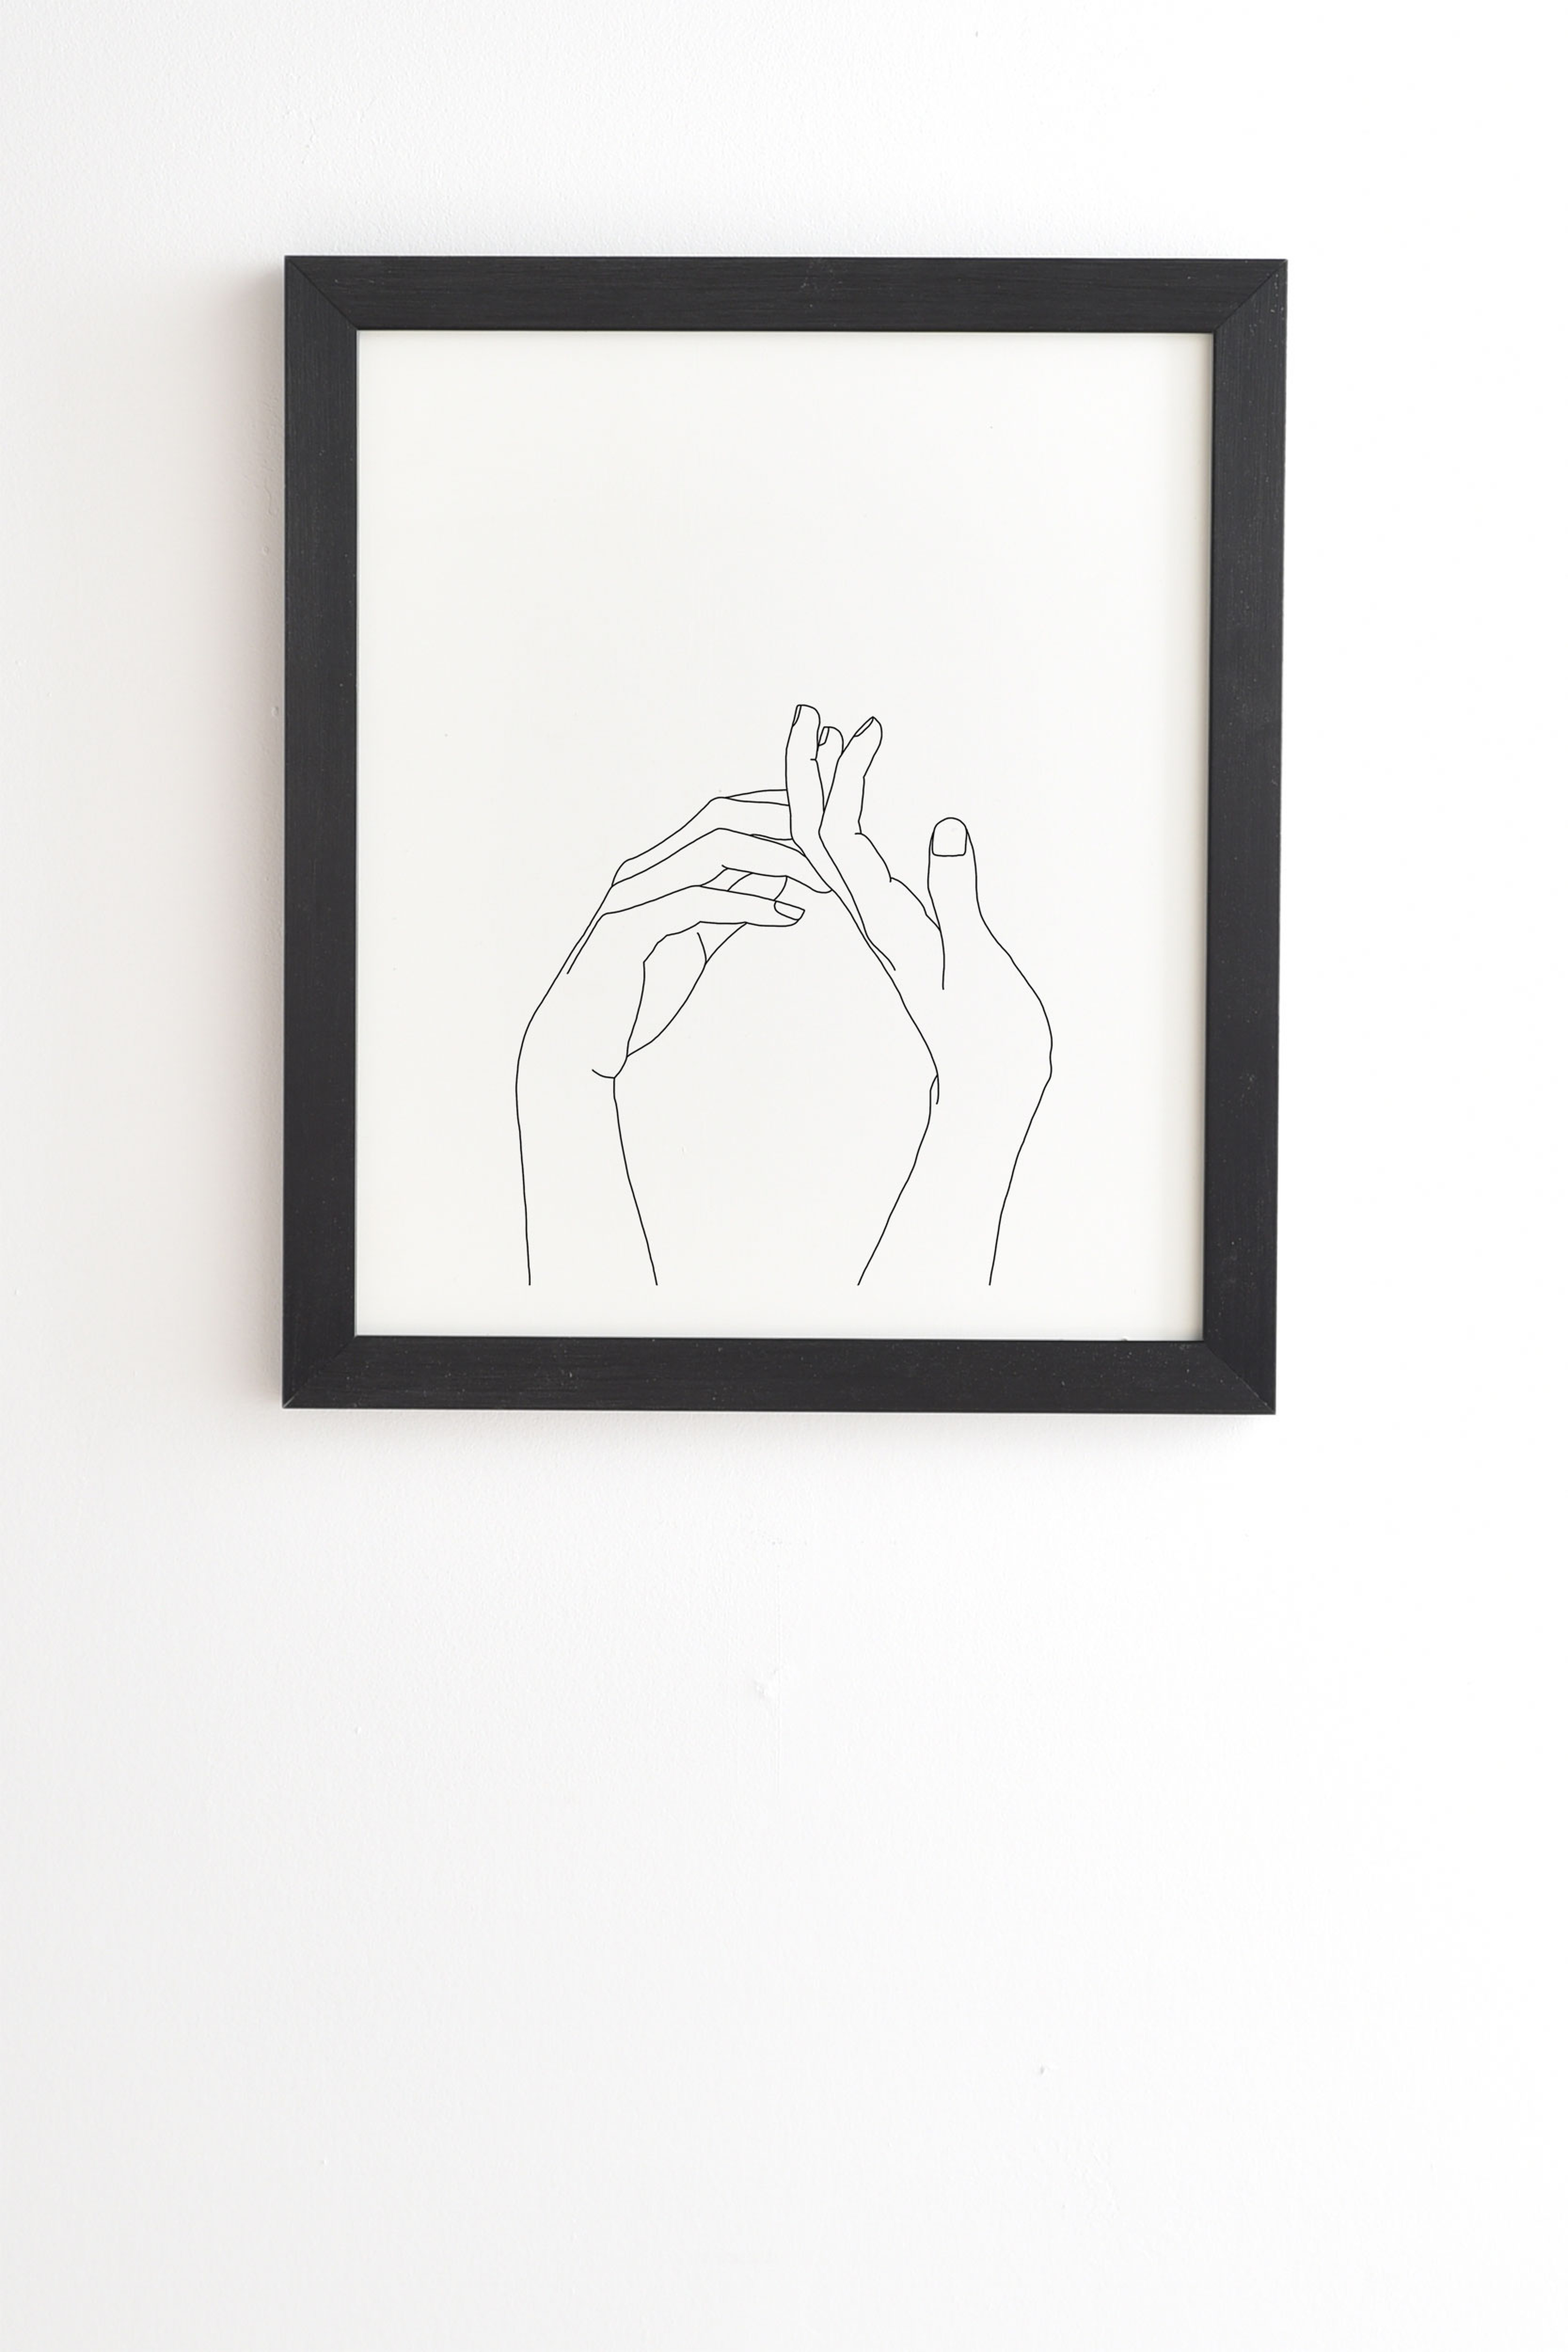 Hands Line Drawing Abi by The Colour Study - Framed Wall Art Basic Black 11" x 13" - Wander Print Co.